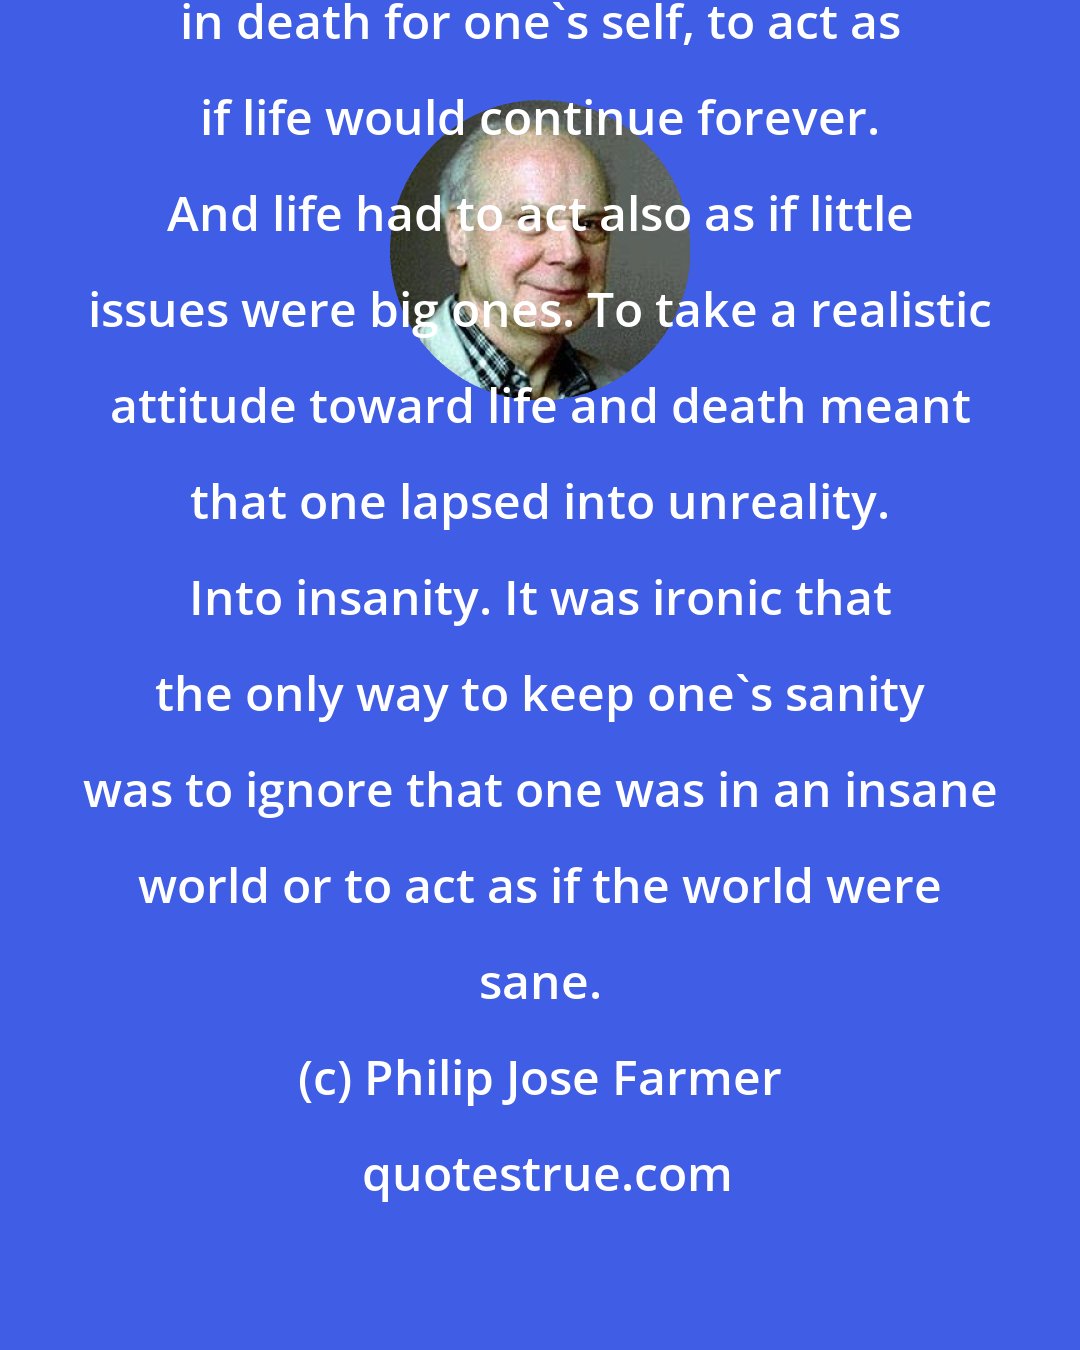 Philip Jose Farmer: It was the essence of life to disbelieve in death for one's self, to act as if life would continue forever. And life had to act also as if little issues were big ones. To take a realistic attitude toward life and death meant that one lapsed into unreality. Into insanity. It was ironic that the only way to keep one's sanity was to ignore that one was in an insane world or to act as if the world were sane.